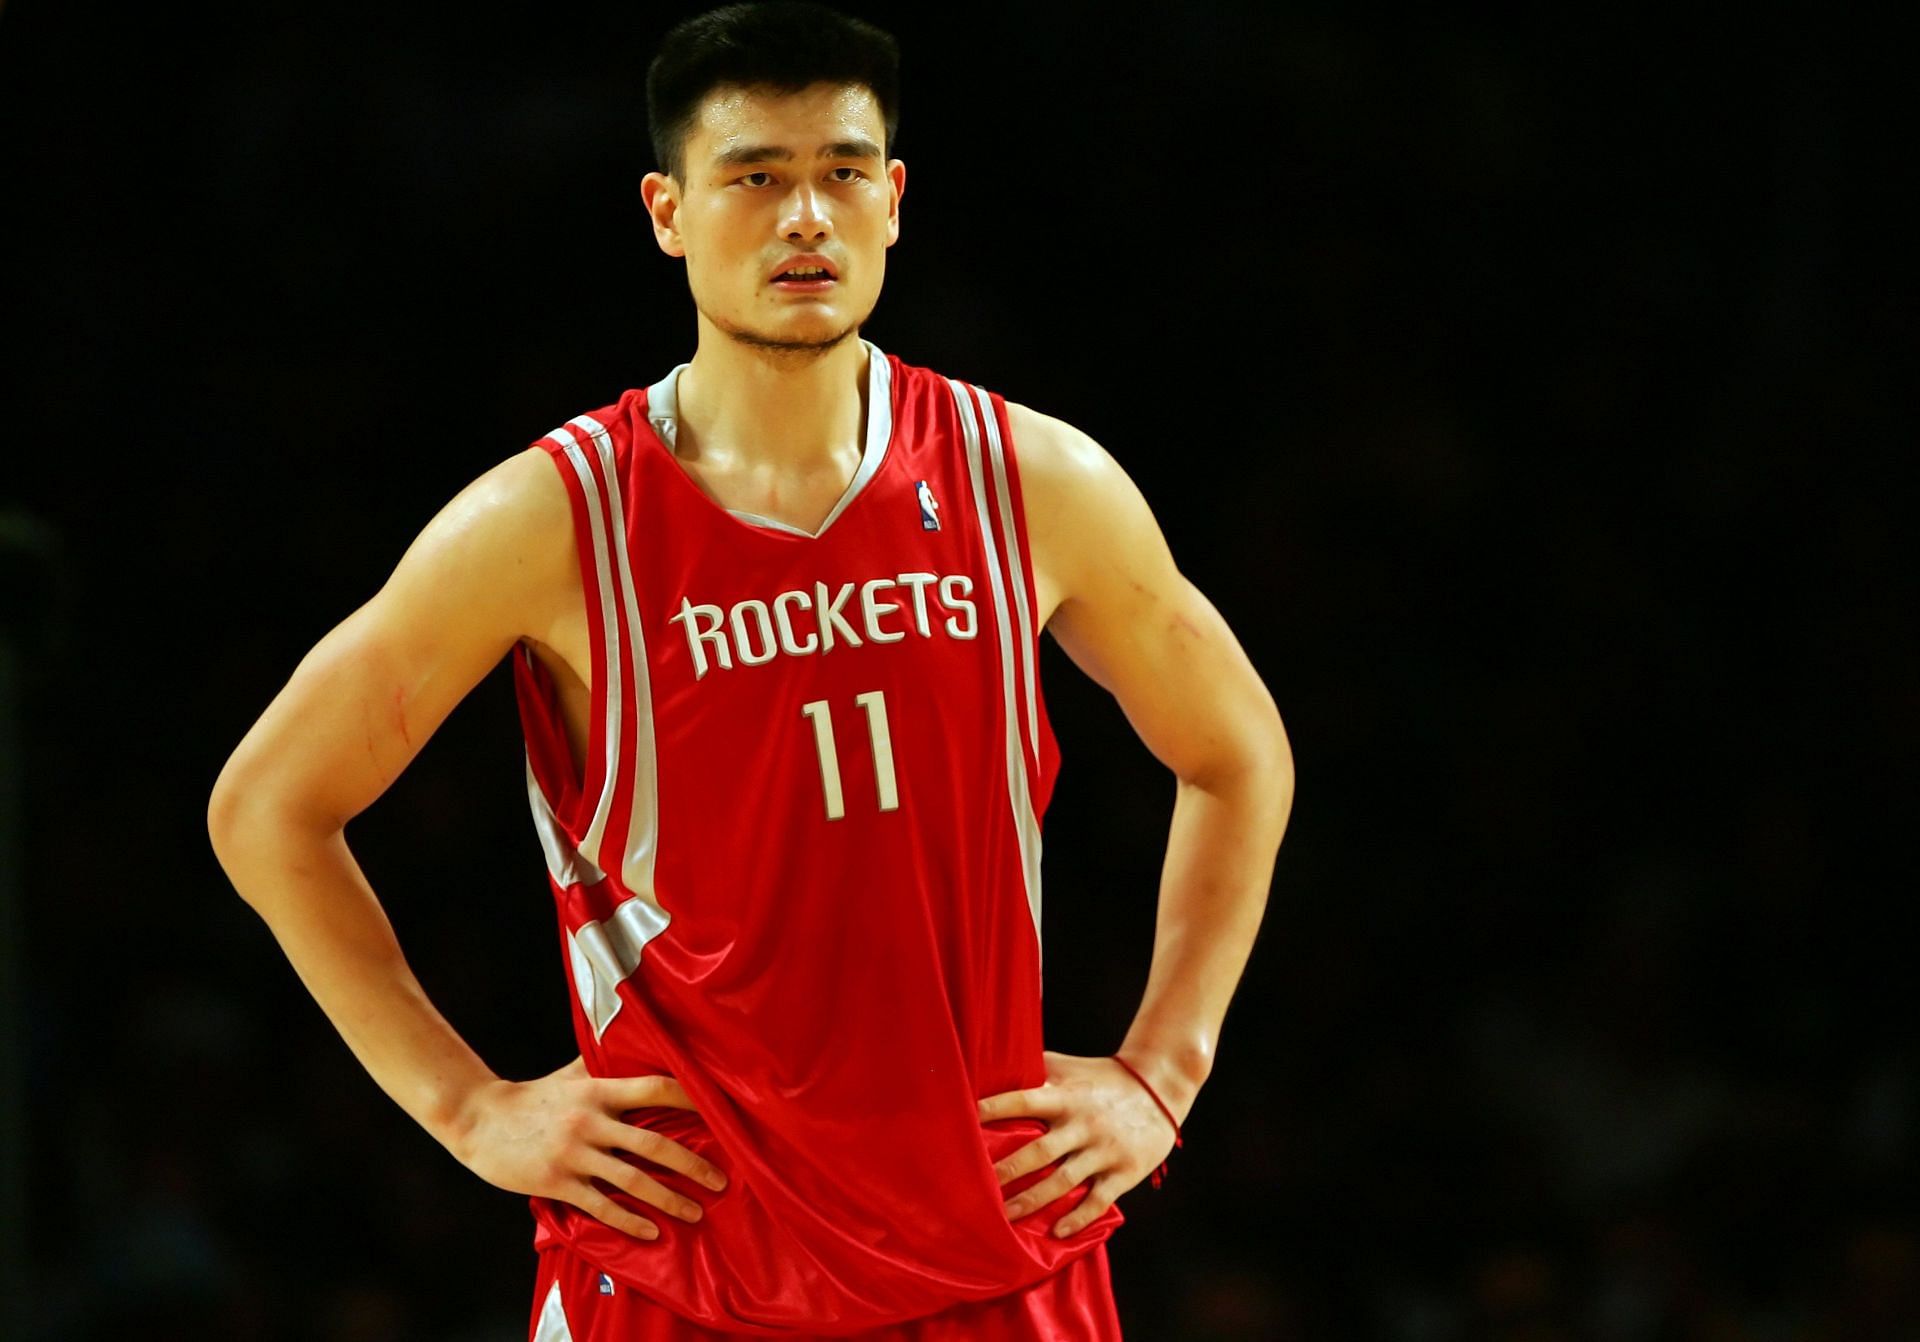 Do you believe Yao Ming only played basketball because of his size